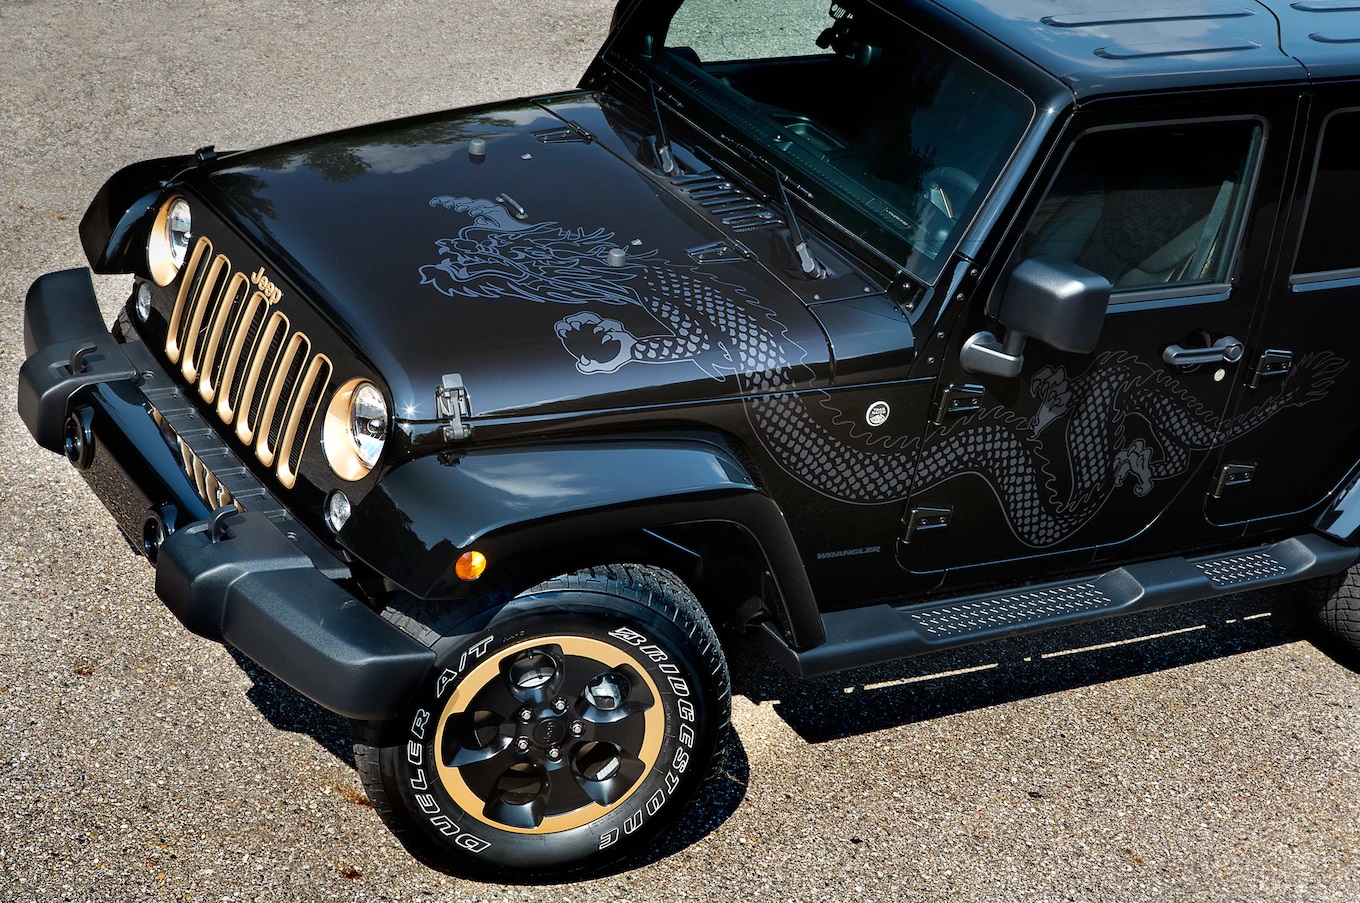 2014-Jeep-Wrangler-Dragon-Edition-front-view